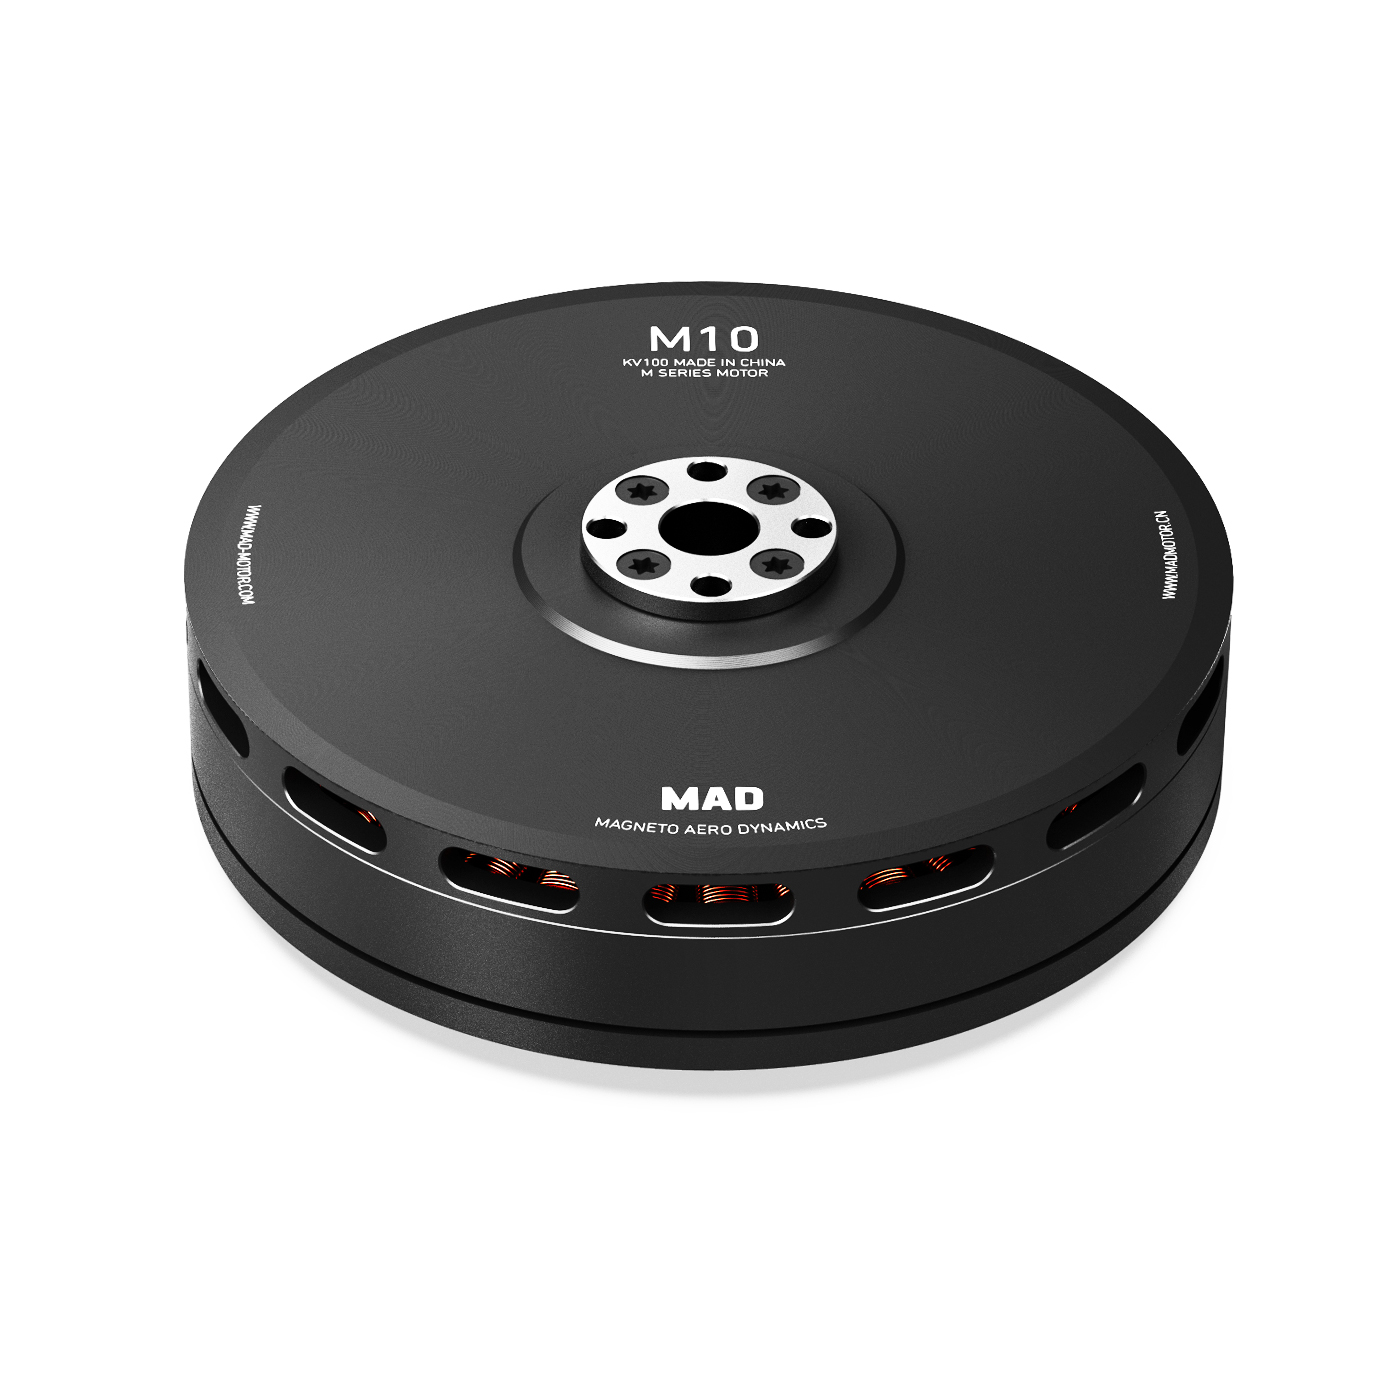 MAD M10 IPE V2.0 Angular Contact Ball Bearing Version brushless motor for the long flight time multirotor hexacopter octocopte for the long flight time tethered drone